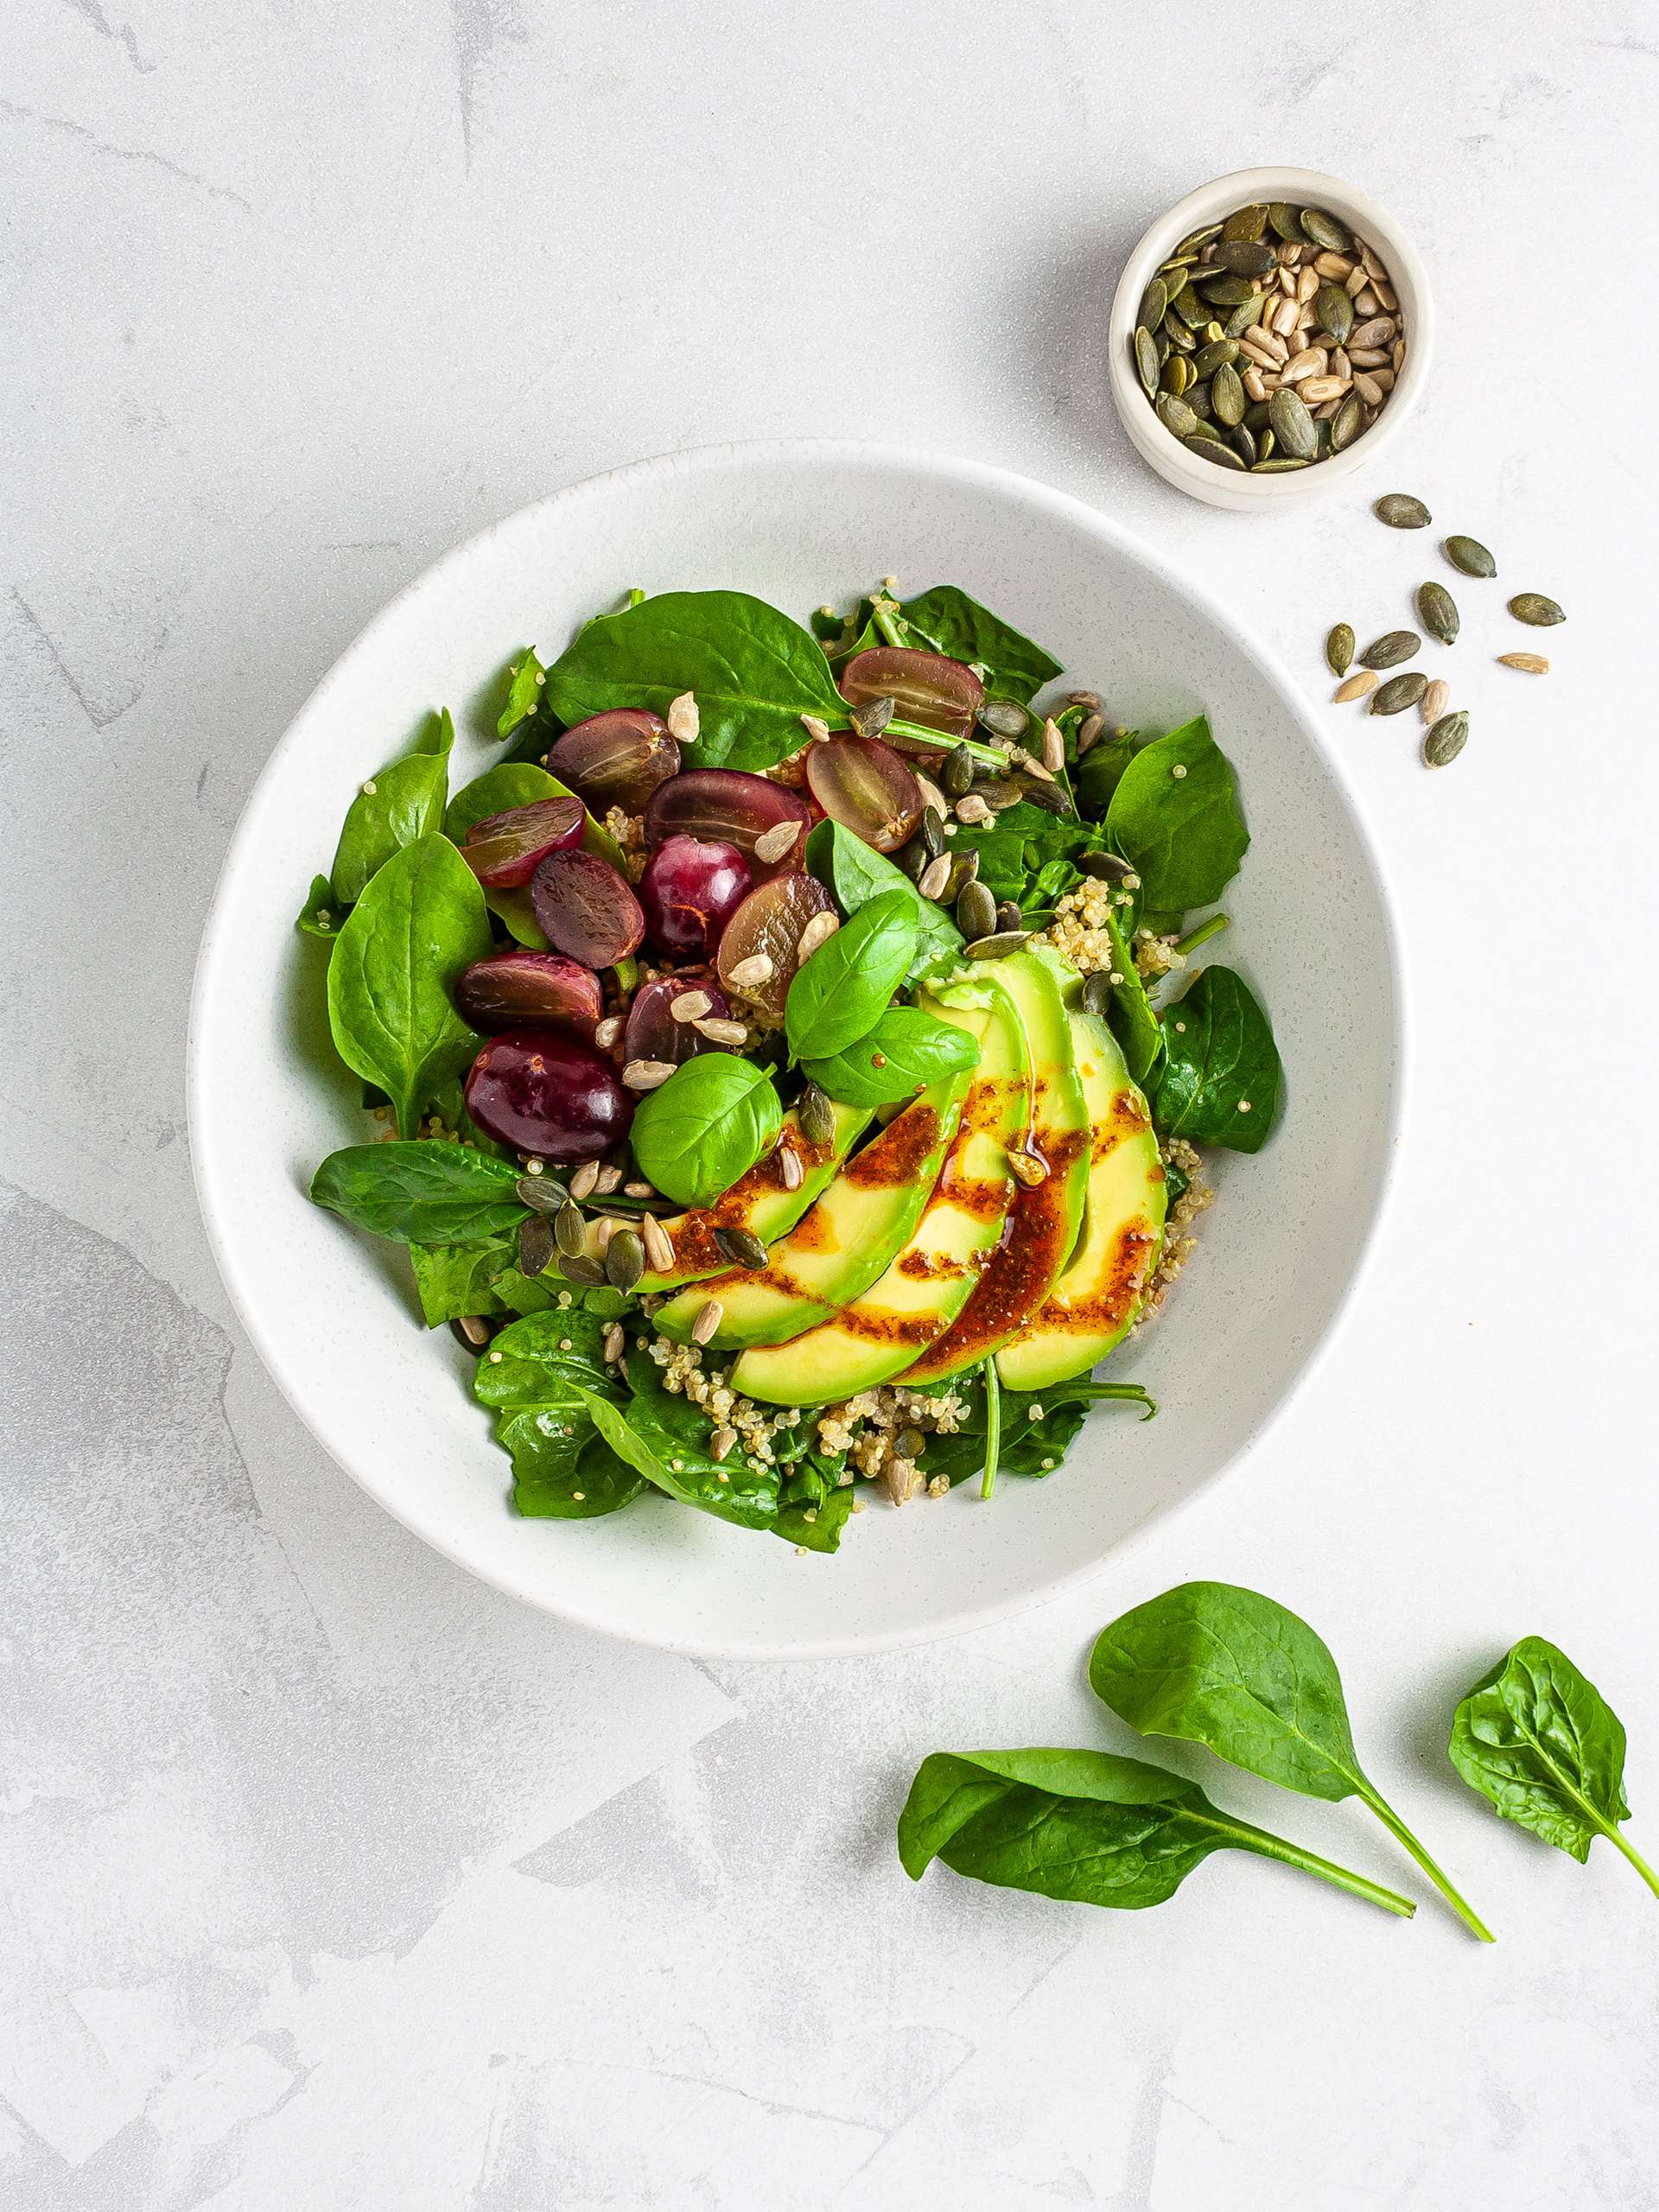 Spinach, grapes, quinoa, and avocado in a salad bowl topped with seeds and dressing